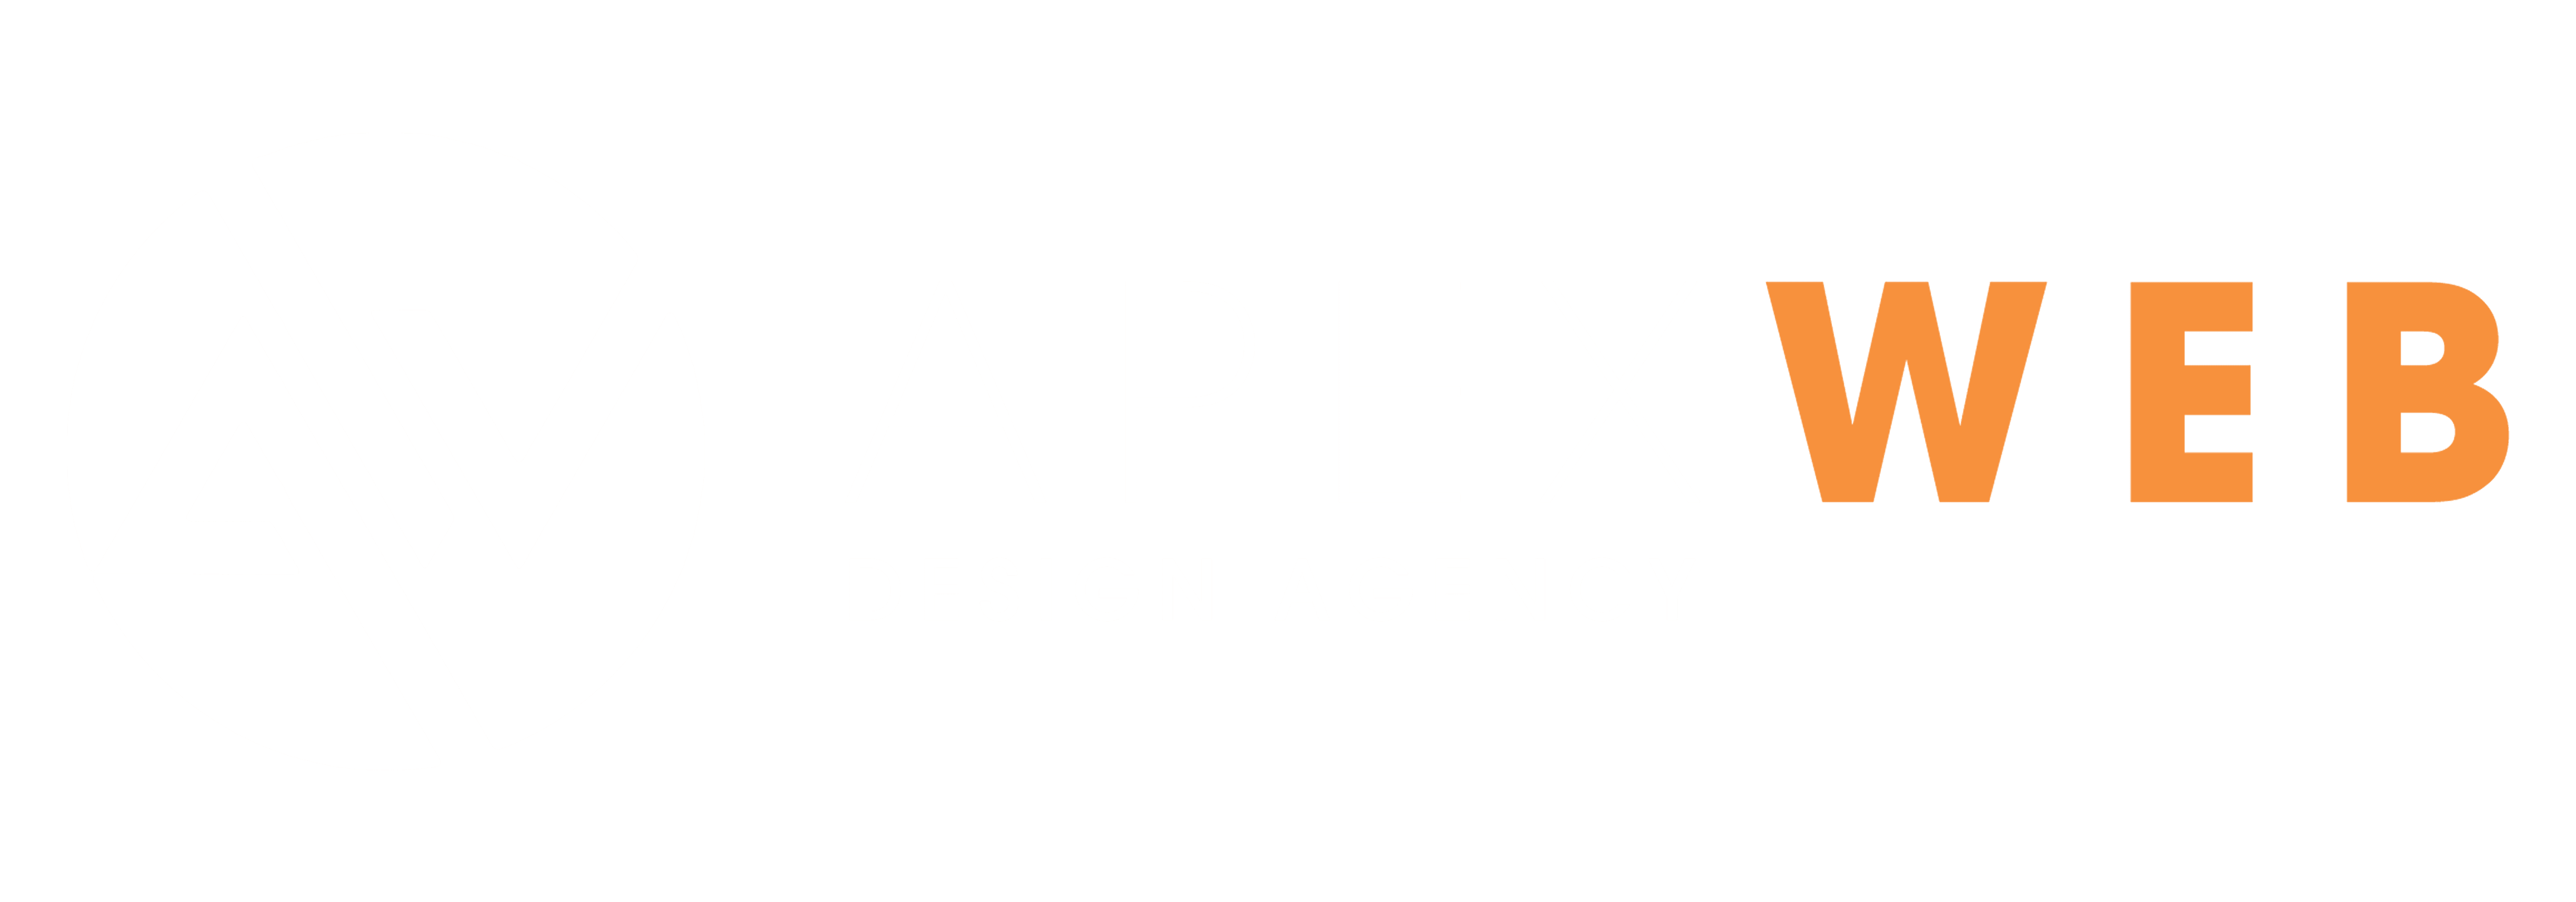 Apex Web Logo for against black background. White text and icons